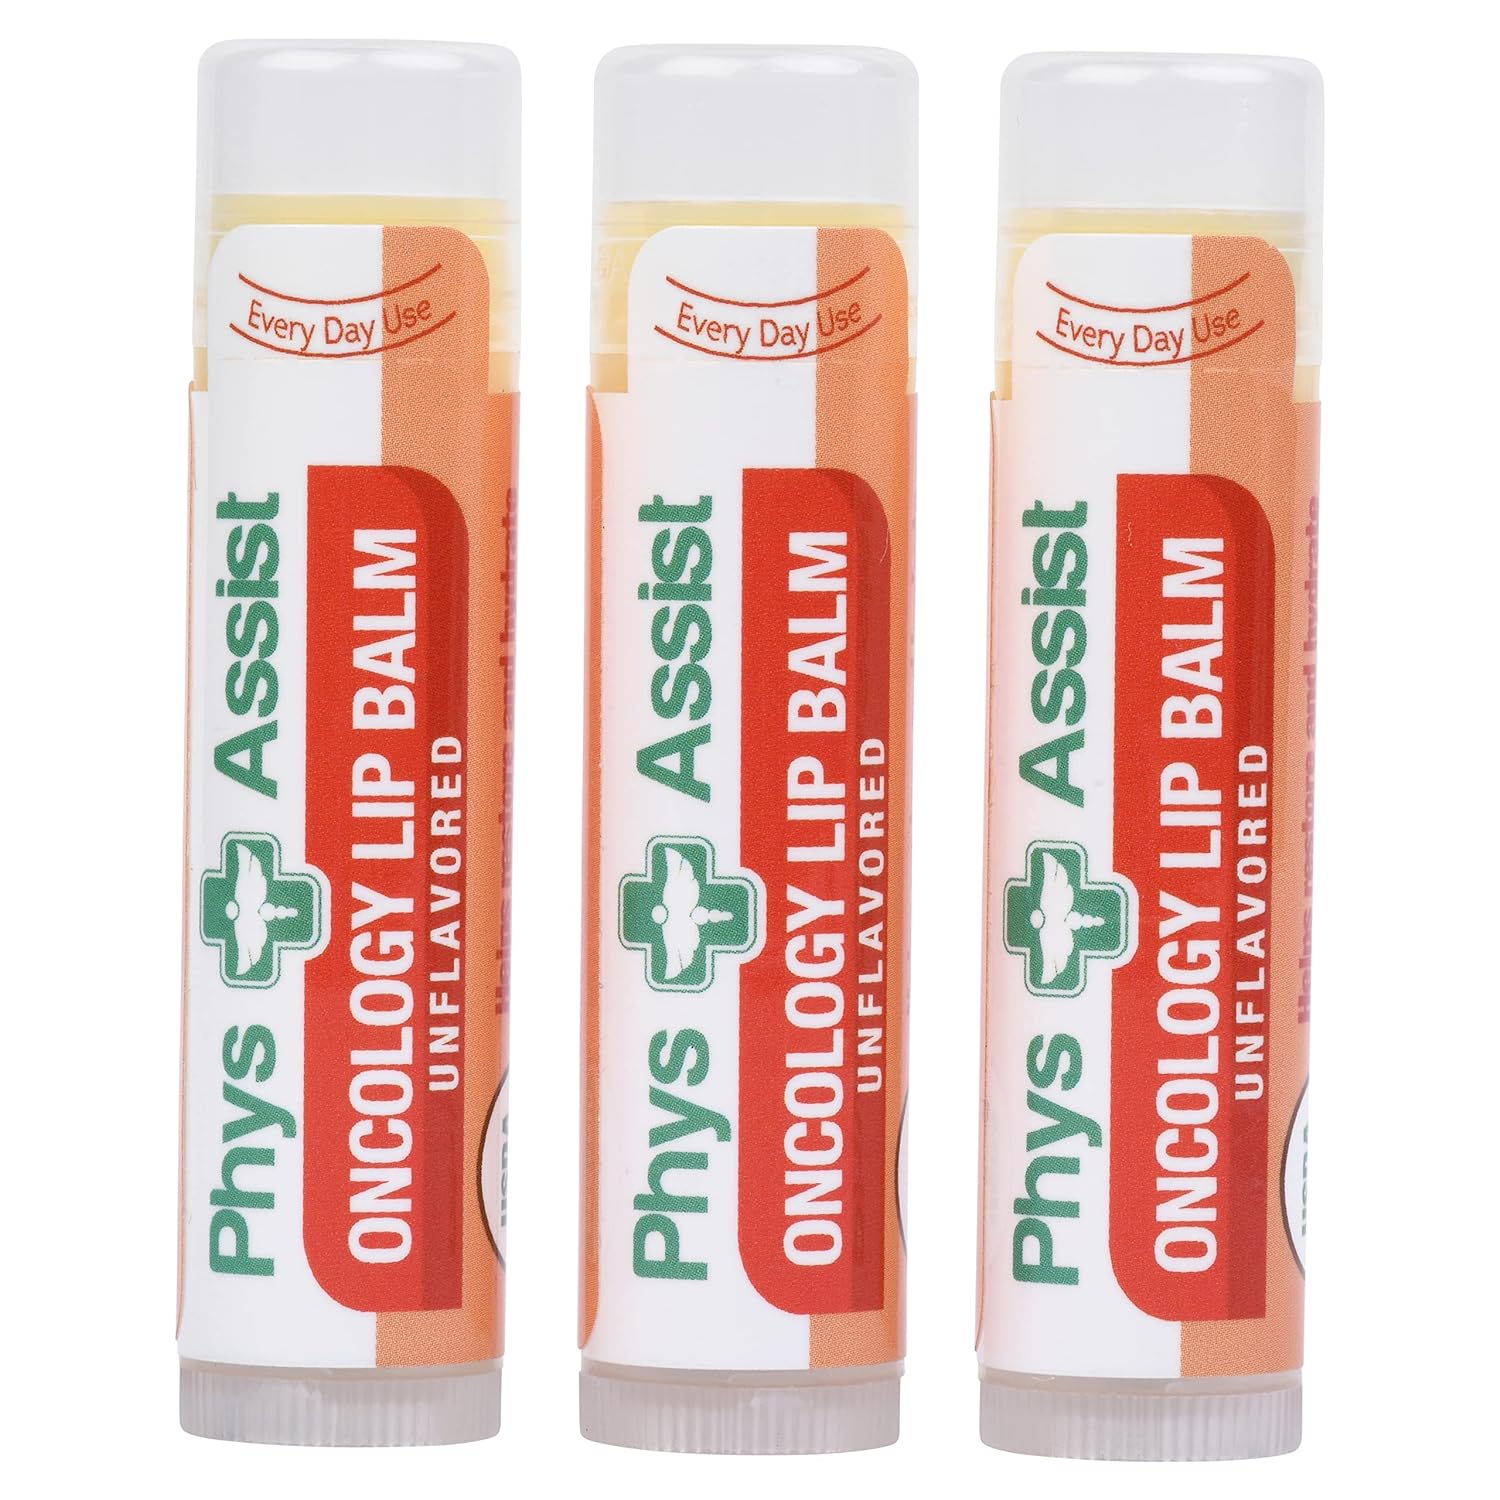 PhysAssist Oncology Lip Balm USDA Organic Unflavored Moisturize, Hydrate & Protect Dry parched lips during Chemo or Radio USDA Organic. 3 Pack